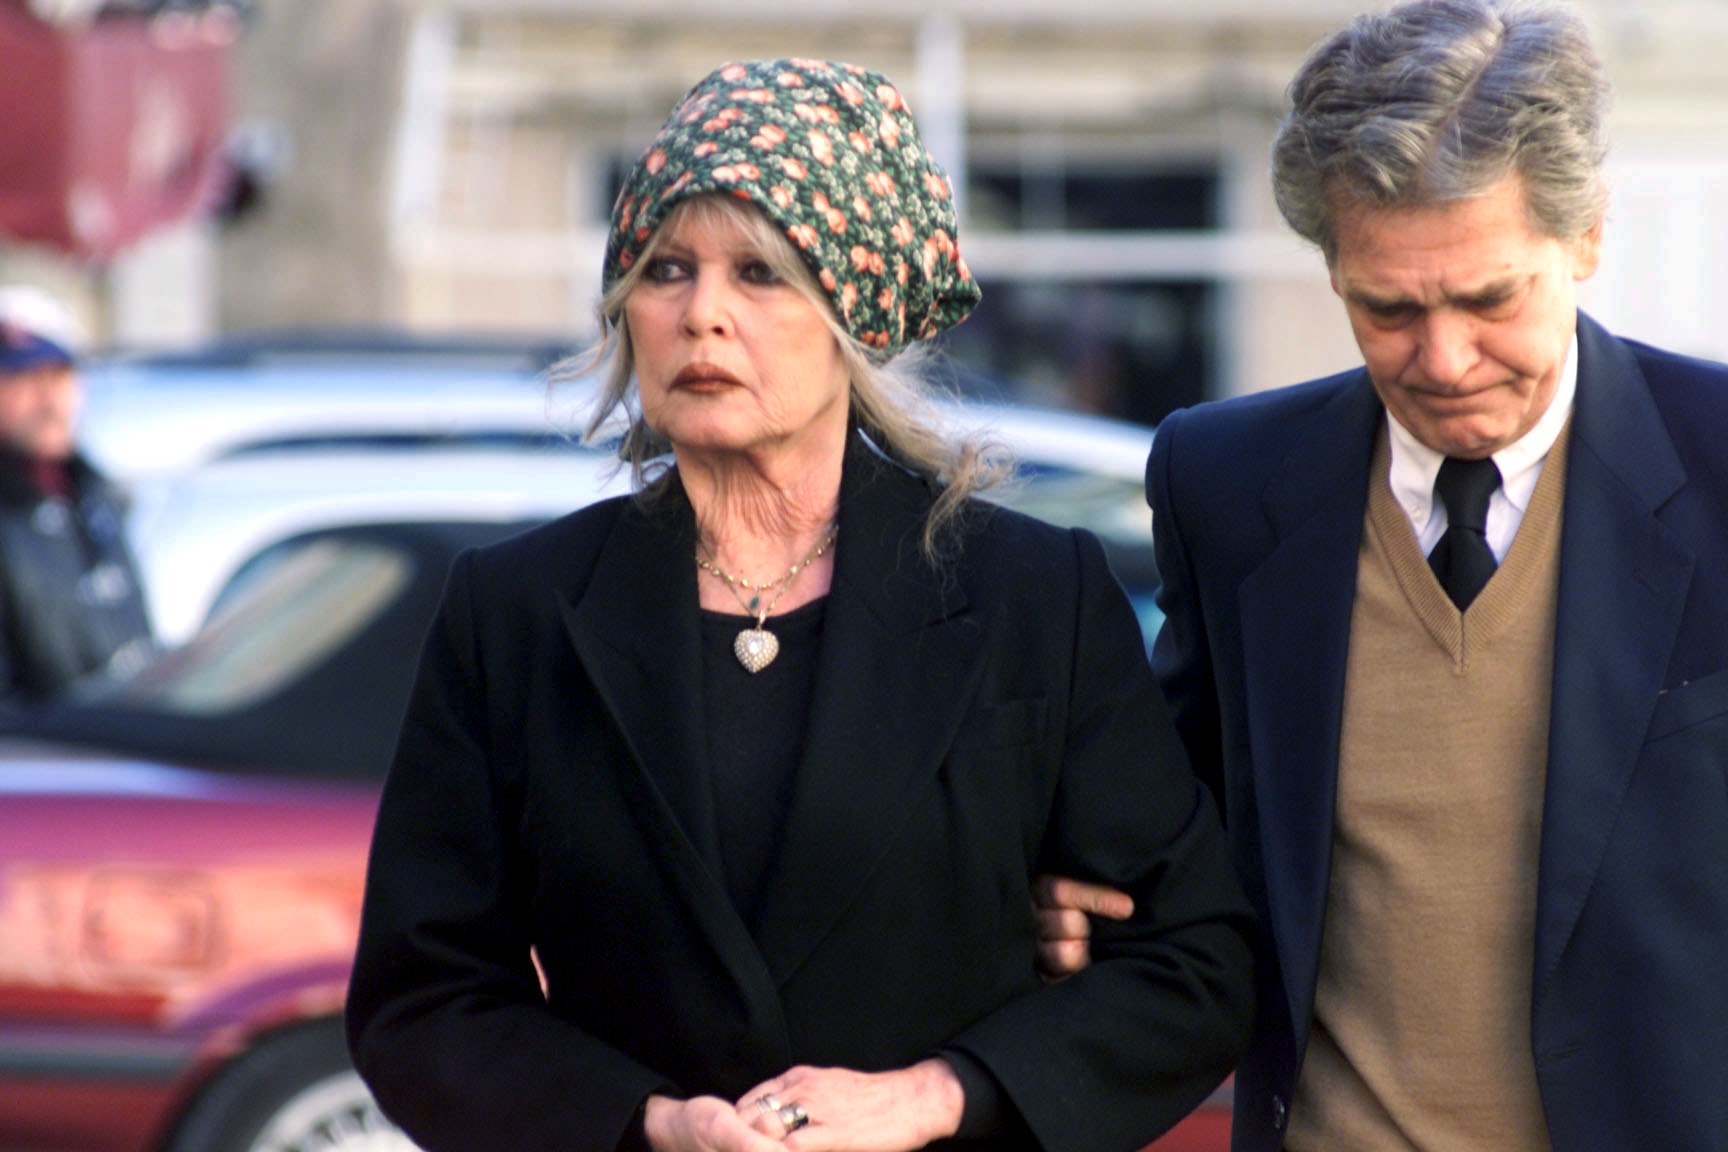 Brigitte Bardot and Bernard d'Ormale attending a funeral in 2000. | Source: Getty Images